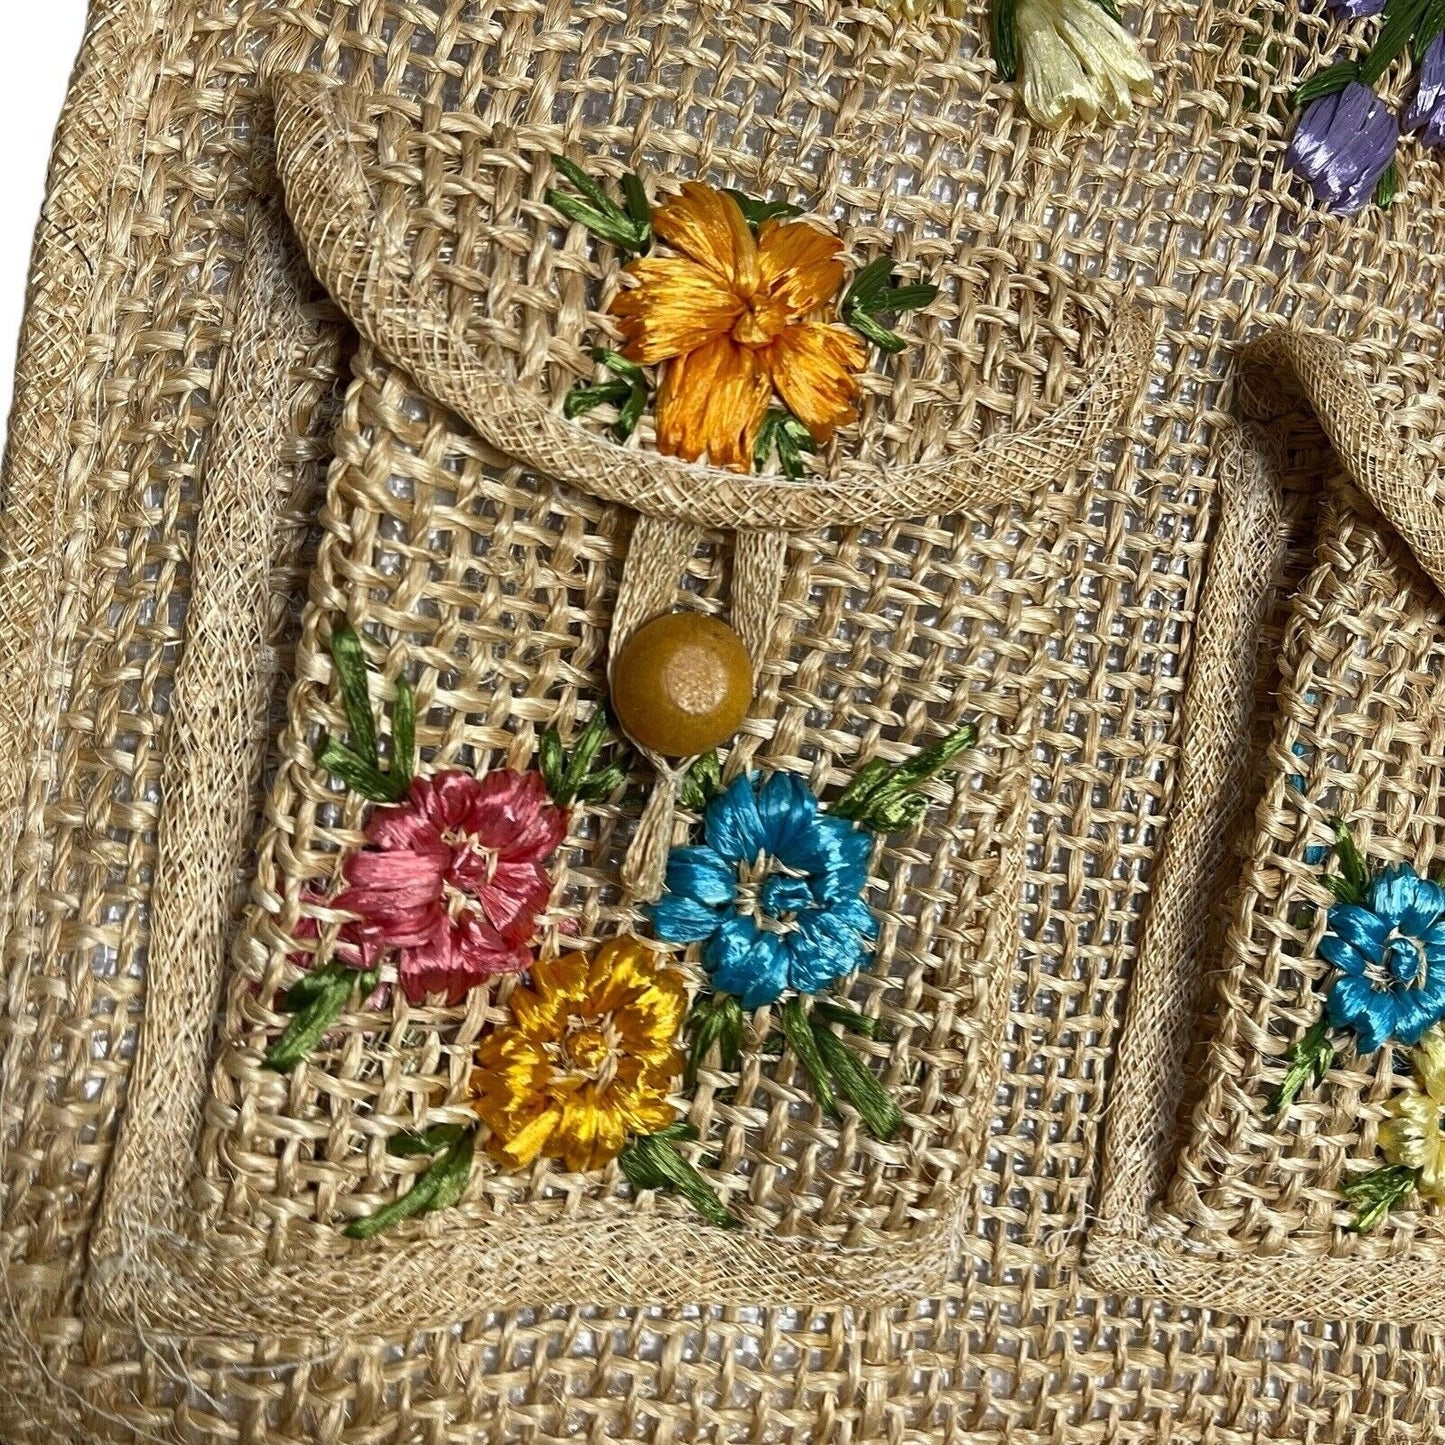 Handmade In The Philippines Straw Tote Bag Women's Brown Floral Cottagecore Boho